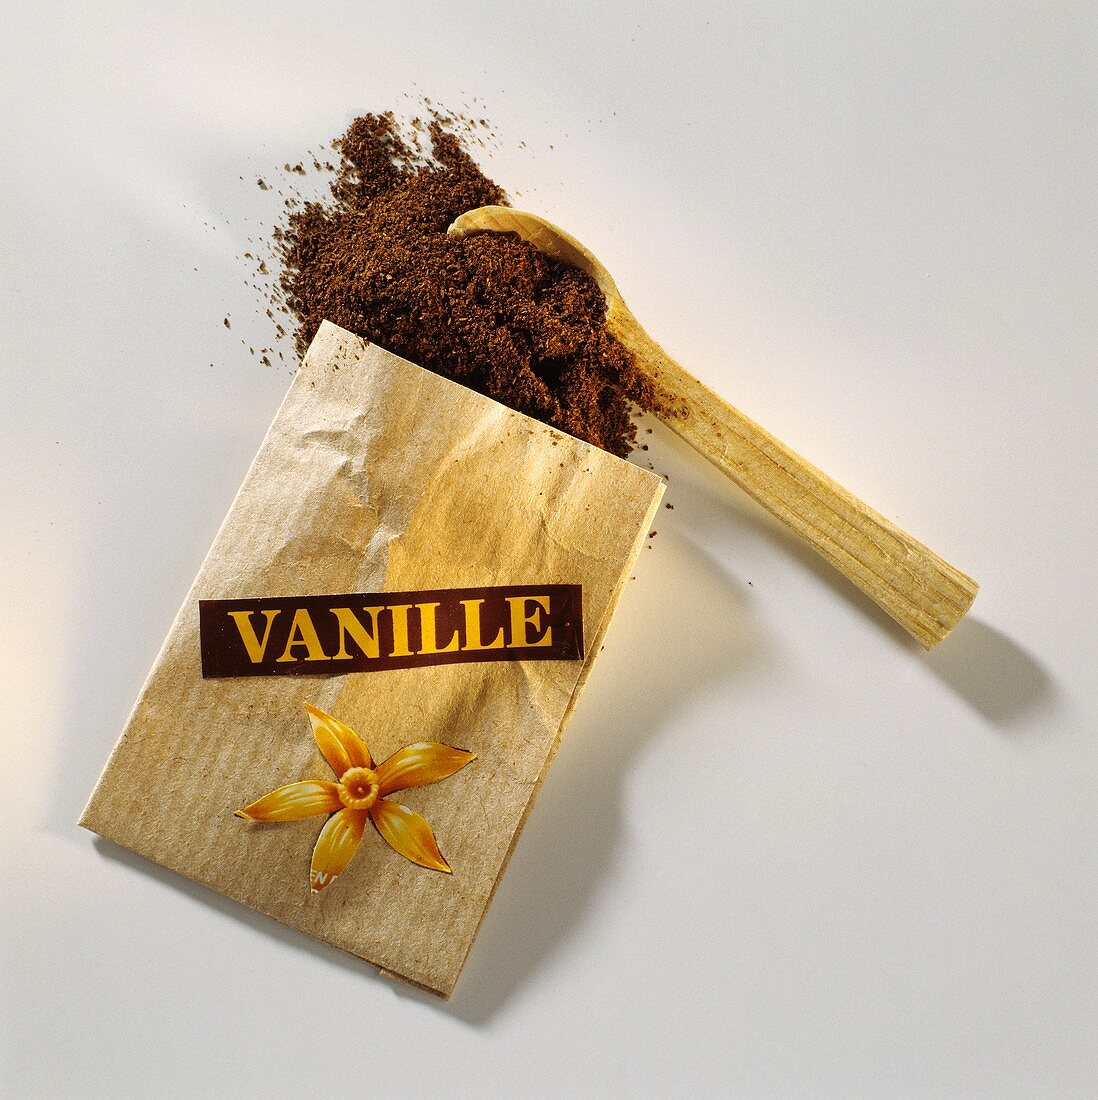 Powdered vanilla from a packet with label, vanilla & spoon